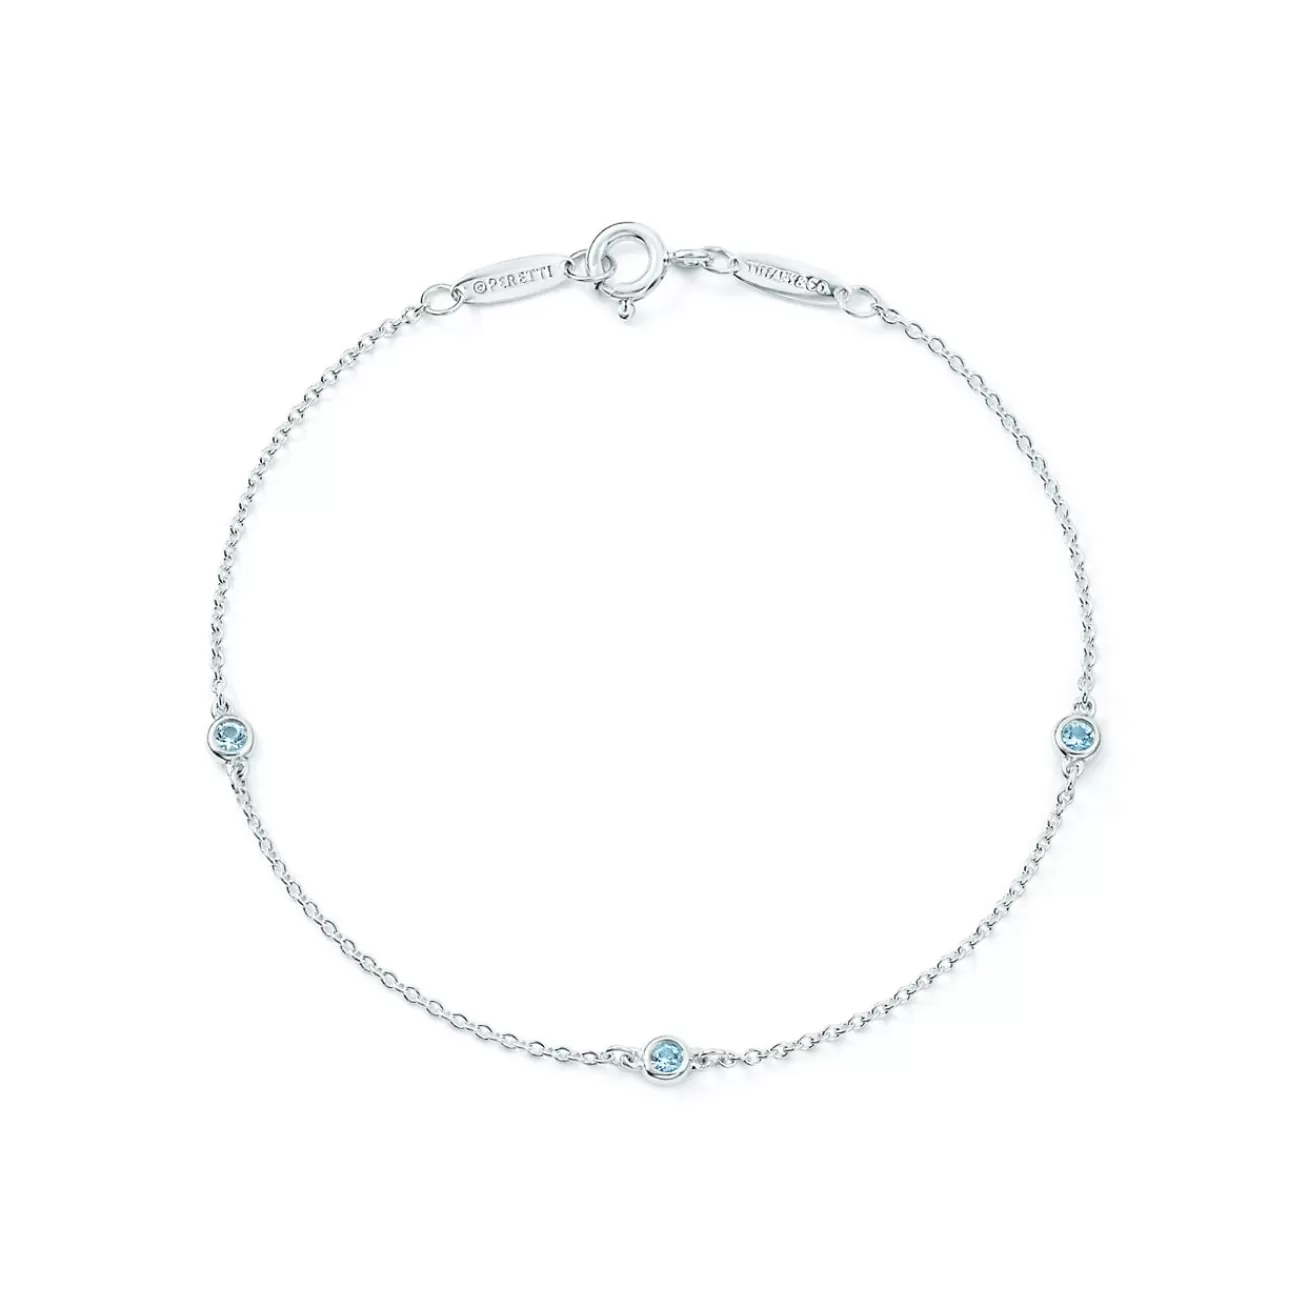 Tiffany & Co. Elsa Peretti® Color by the Yard bracelet in sterling silver with aquamarines. | ^ Bracelets | Sterling Silver Jewelry